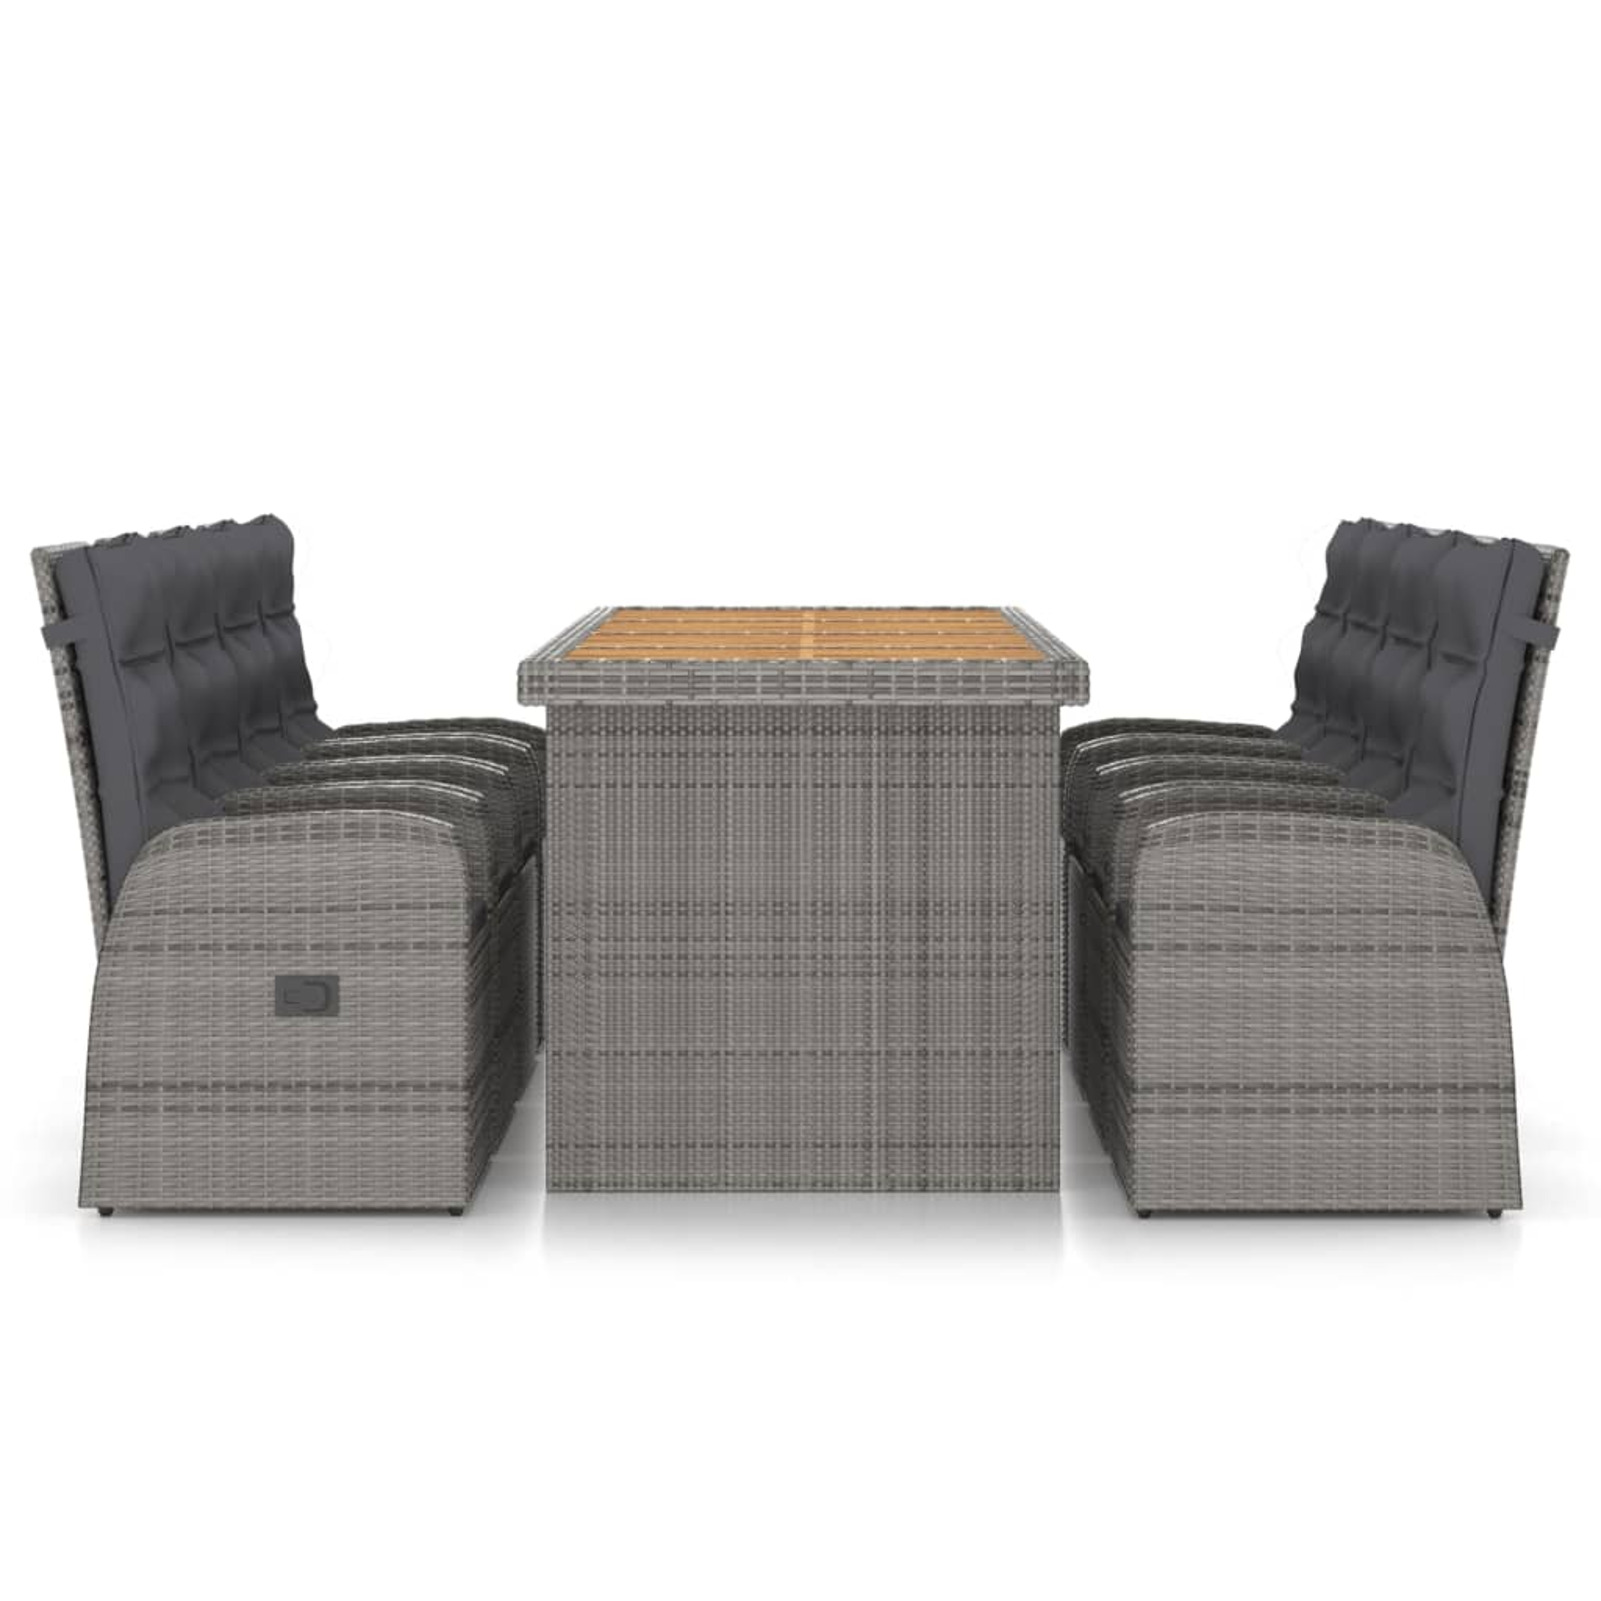 9 Piece Outdoor Dining Set with Cushions Poly Rattan Gray - image 2 of 7